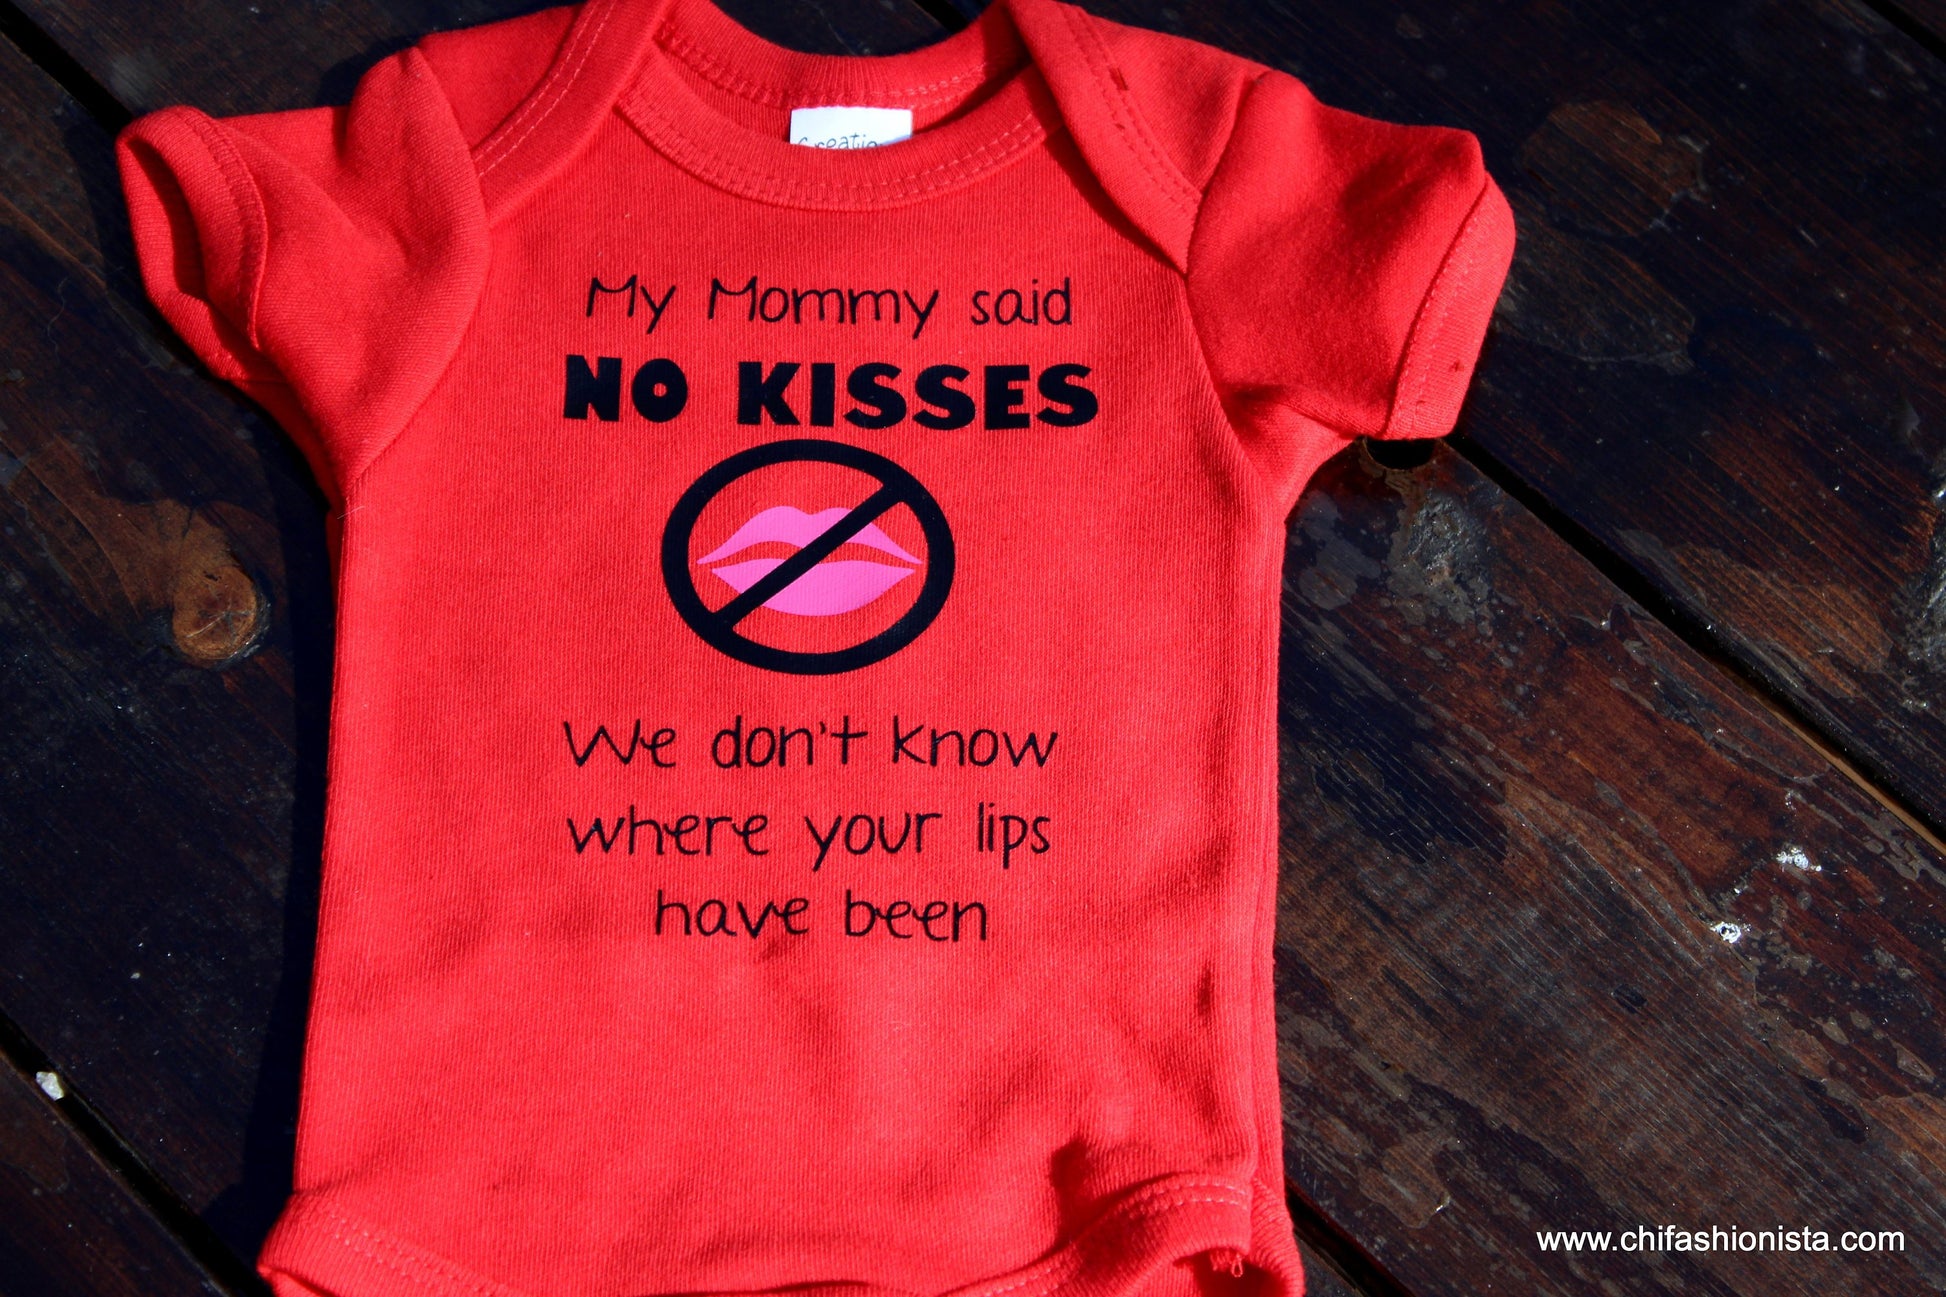 Handcrafted Children's Clothing, Clothing for Children and Parents, NO Kisses - We don't know where your lips have been, chi-fashionista